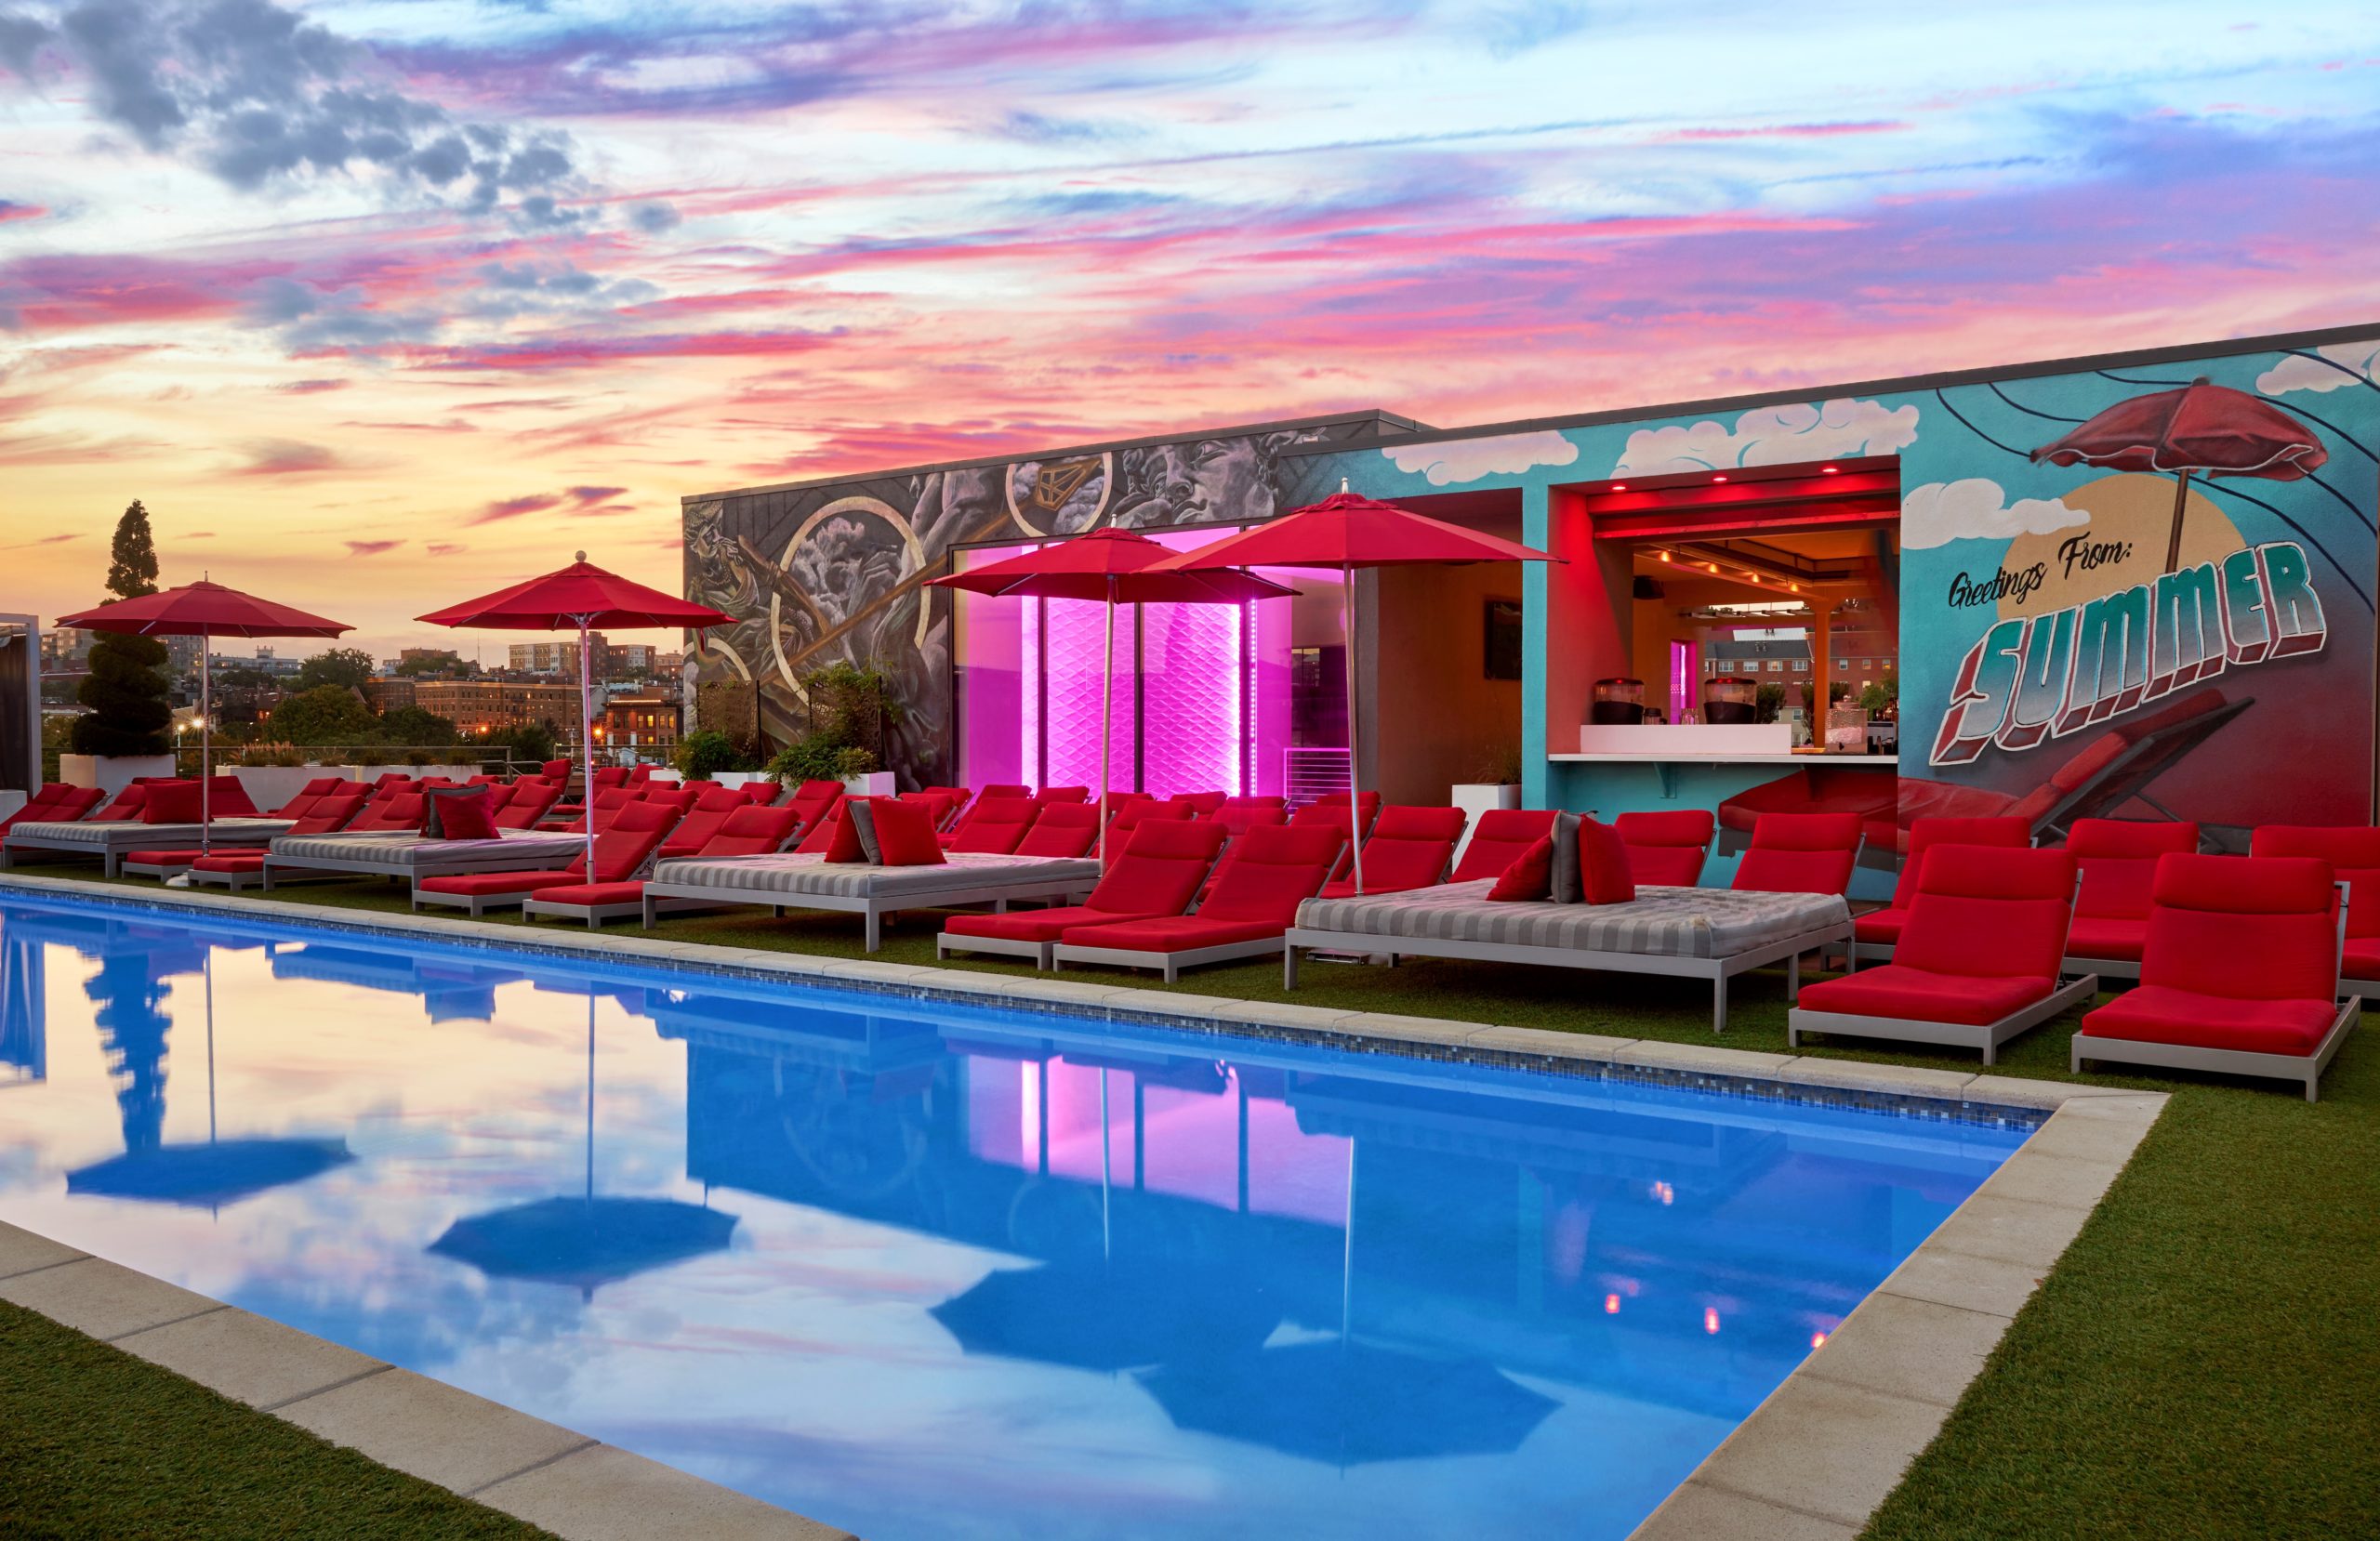 A rooftop pool with a beautiful pink sunset behind it, as well as red lounge chairs and umbrellas on the sides.